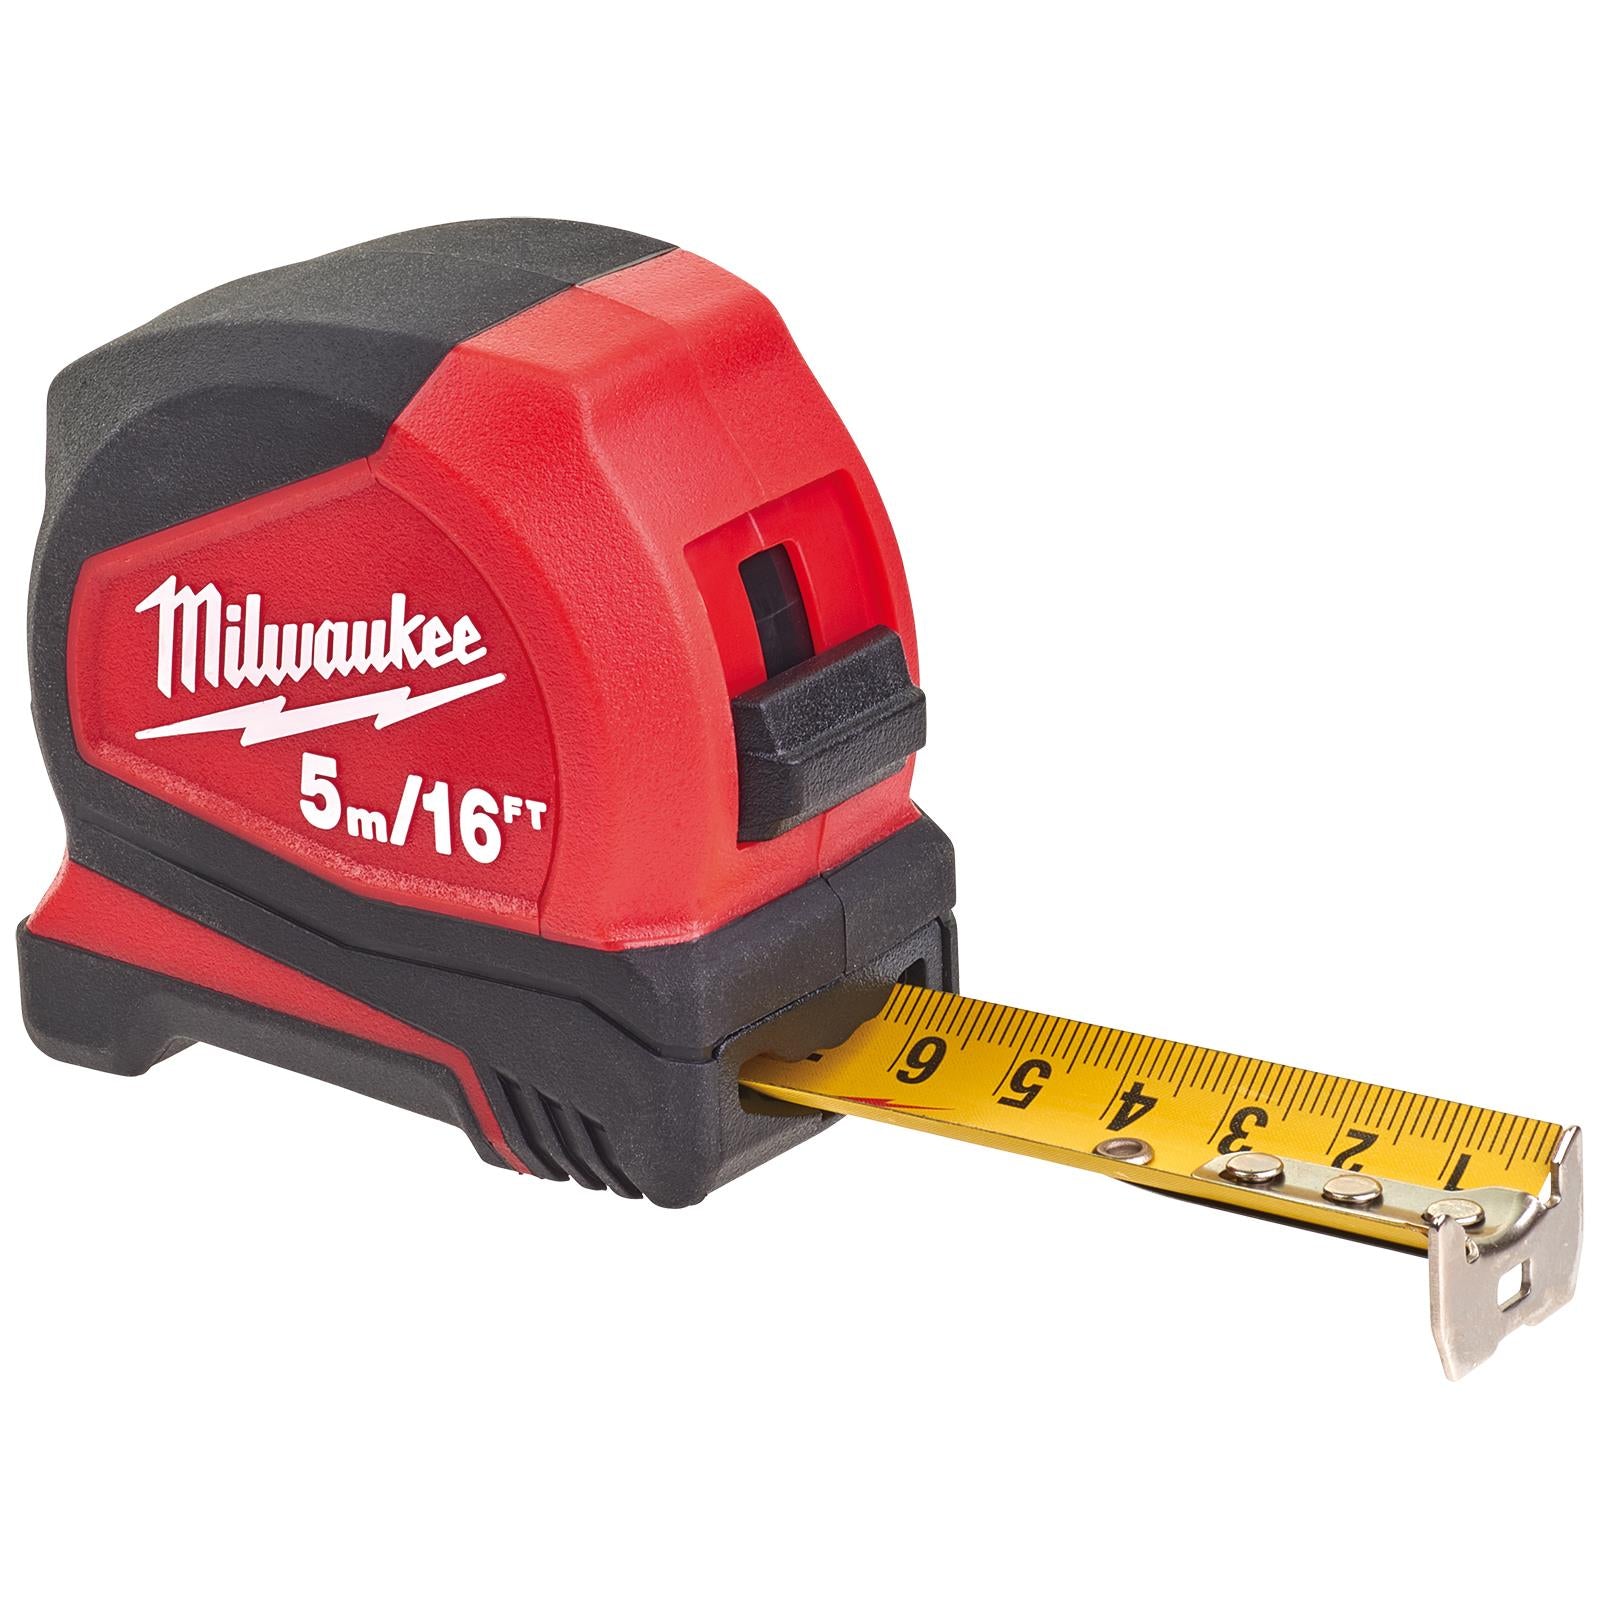 Milwaukee Tape Measure 5m 16ft Metric Imperial Pro Compact Pocket Tape